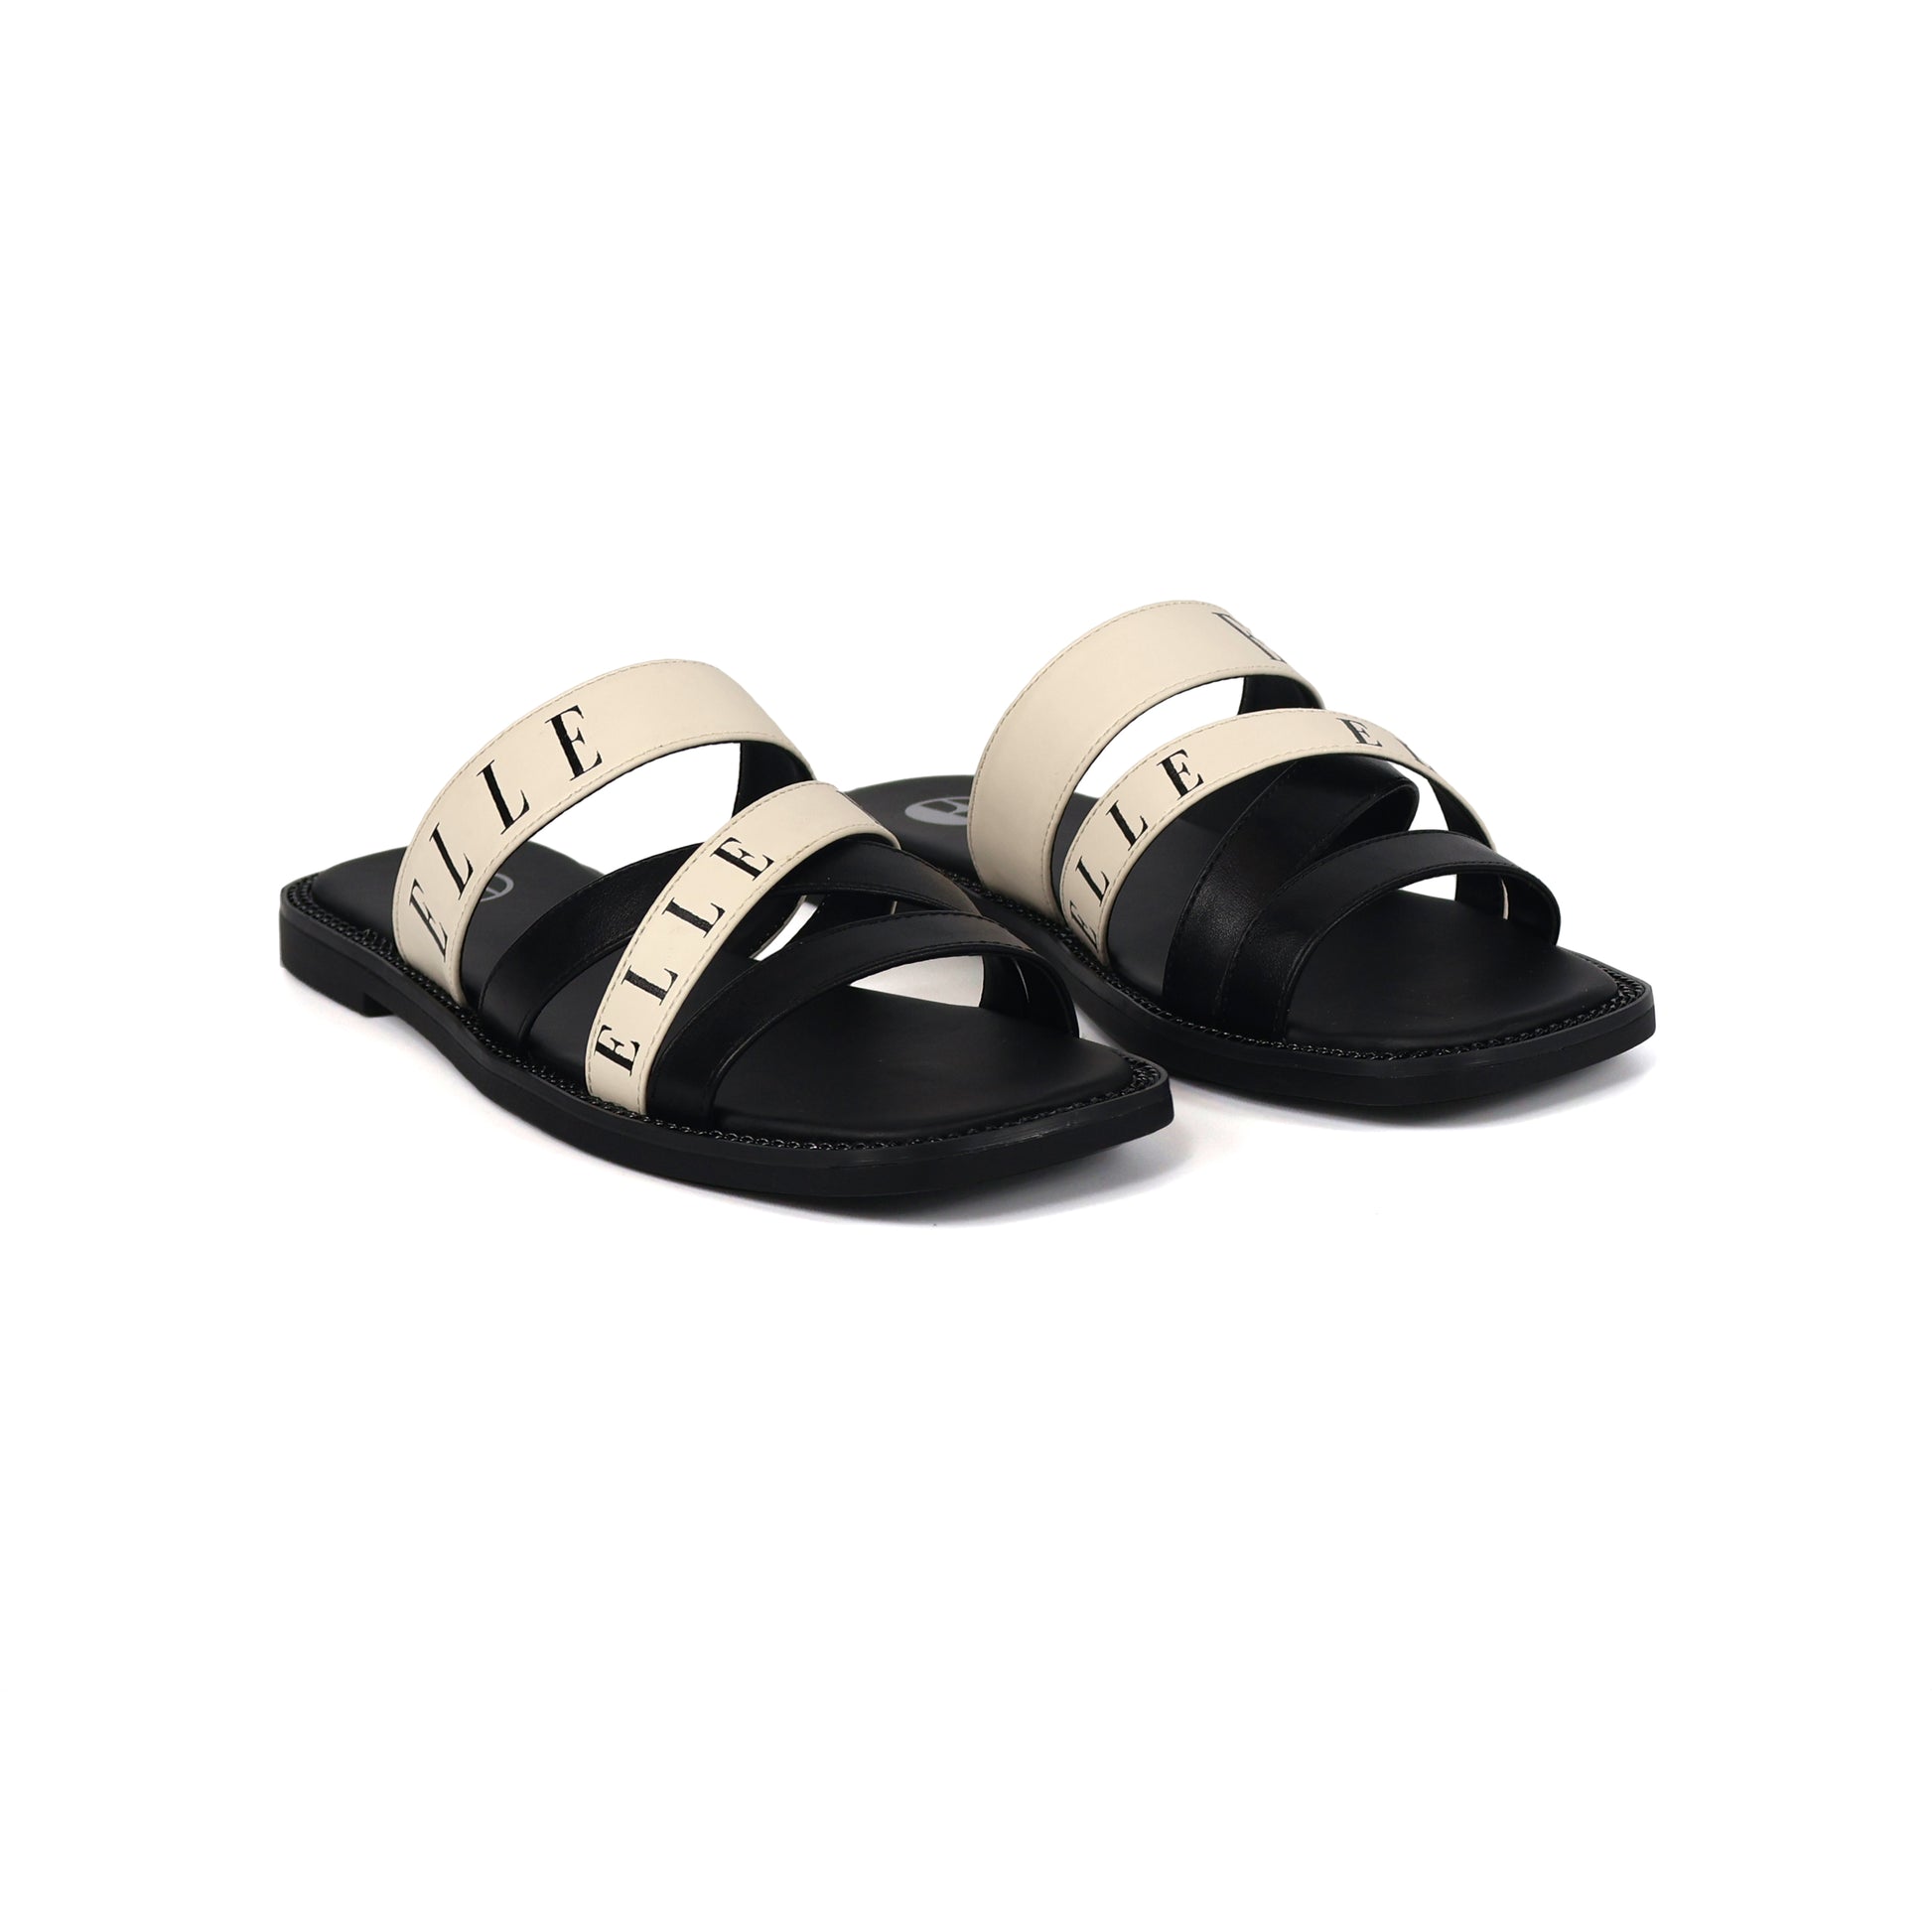 Oceana Comfy Fit Classic Faux Leather Sandal in Black